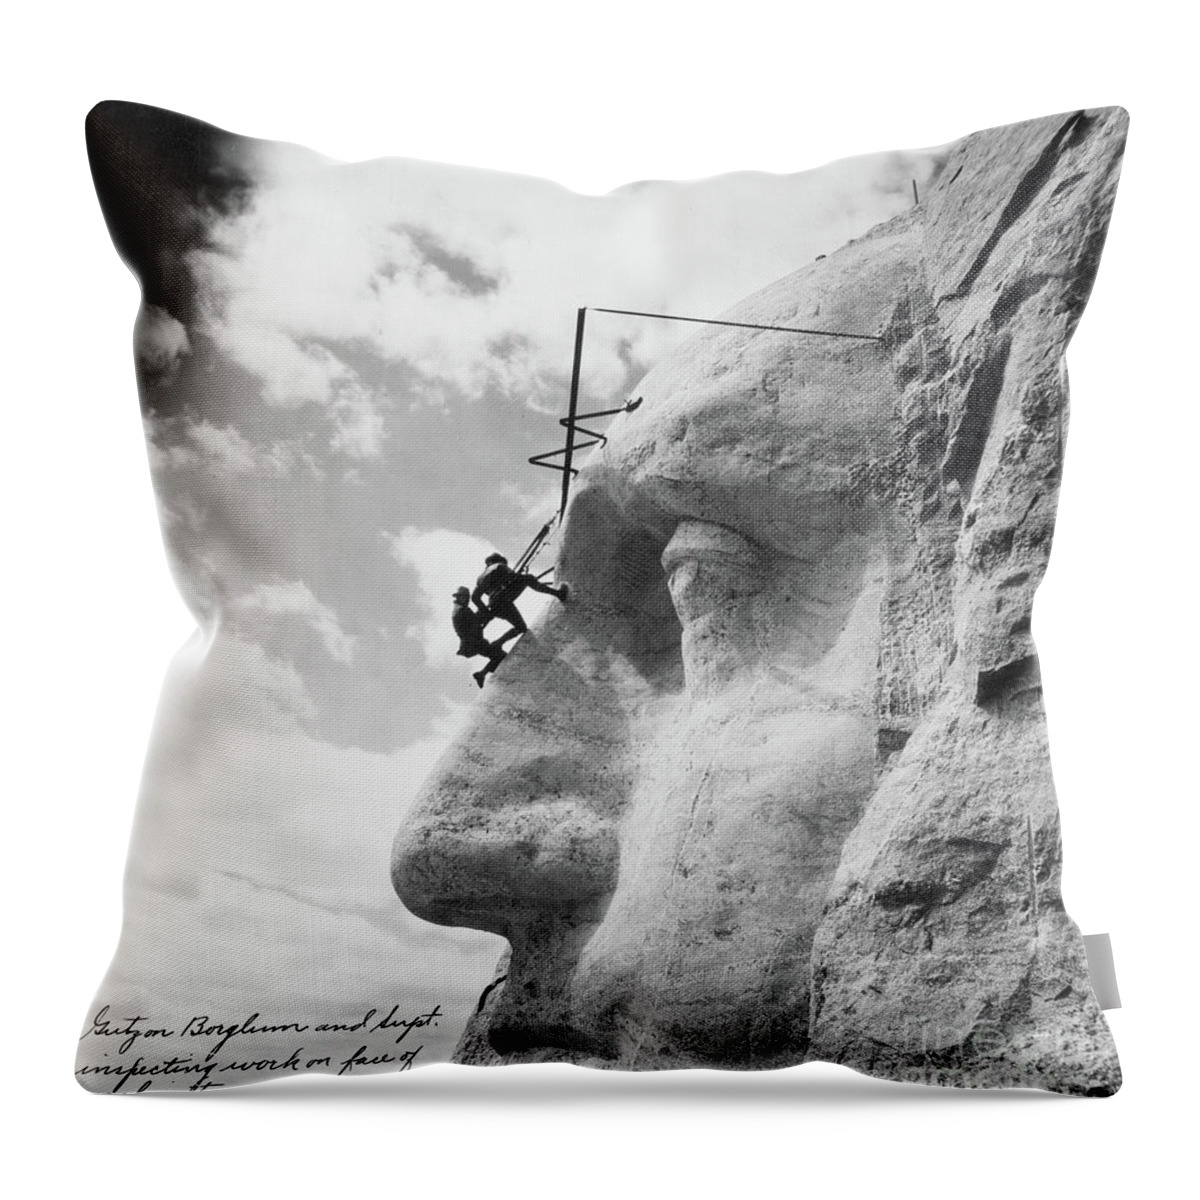 Mount Rushmore Throw Pillow featuring the photograph Gutzon Borglum inspecting work on Washington at Mount Rushmore by American School